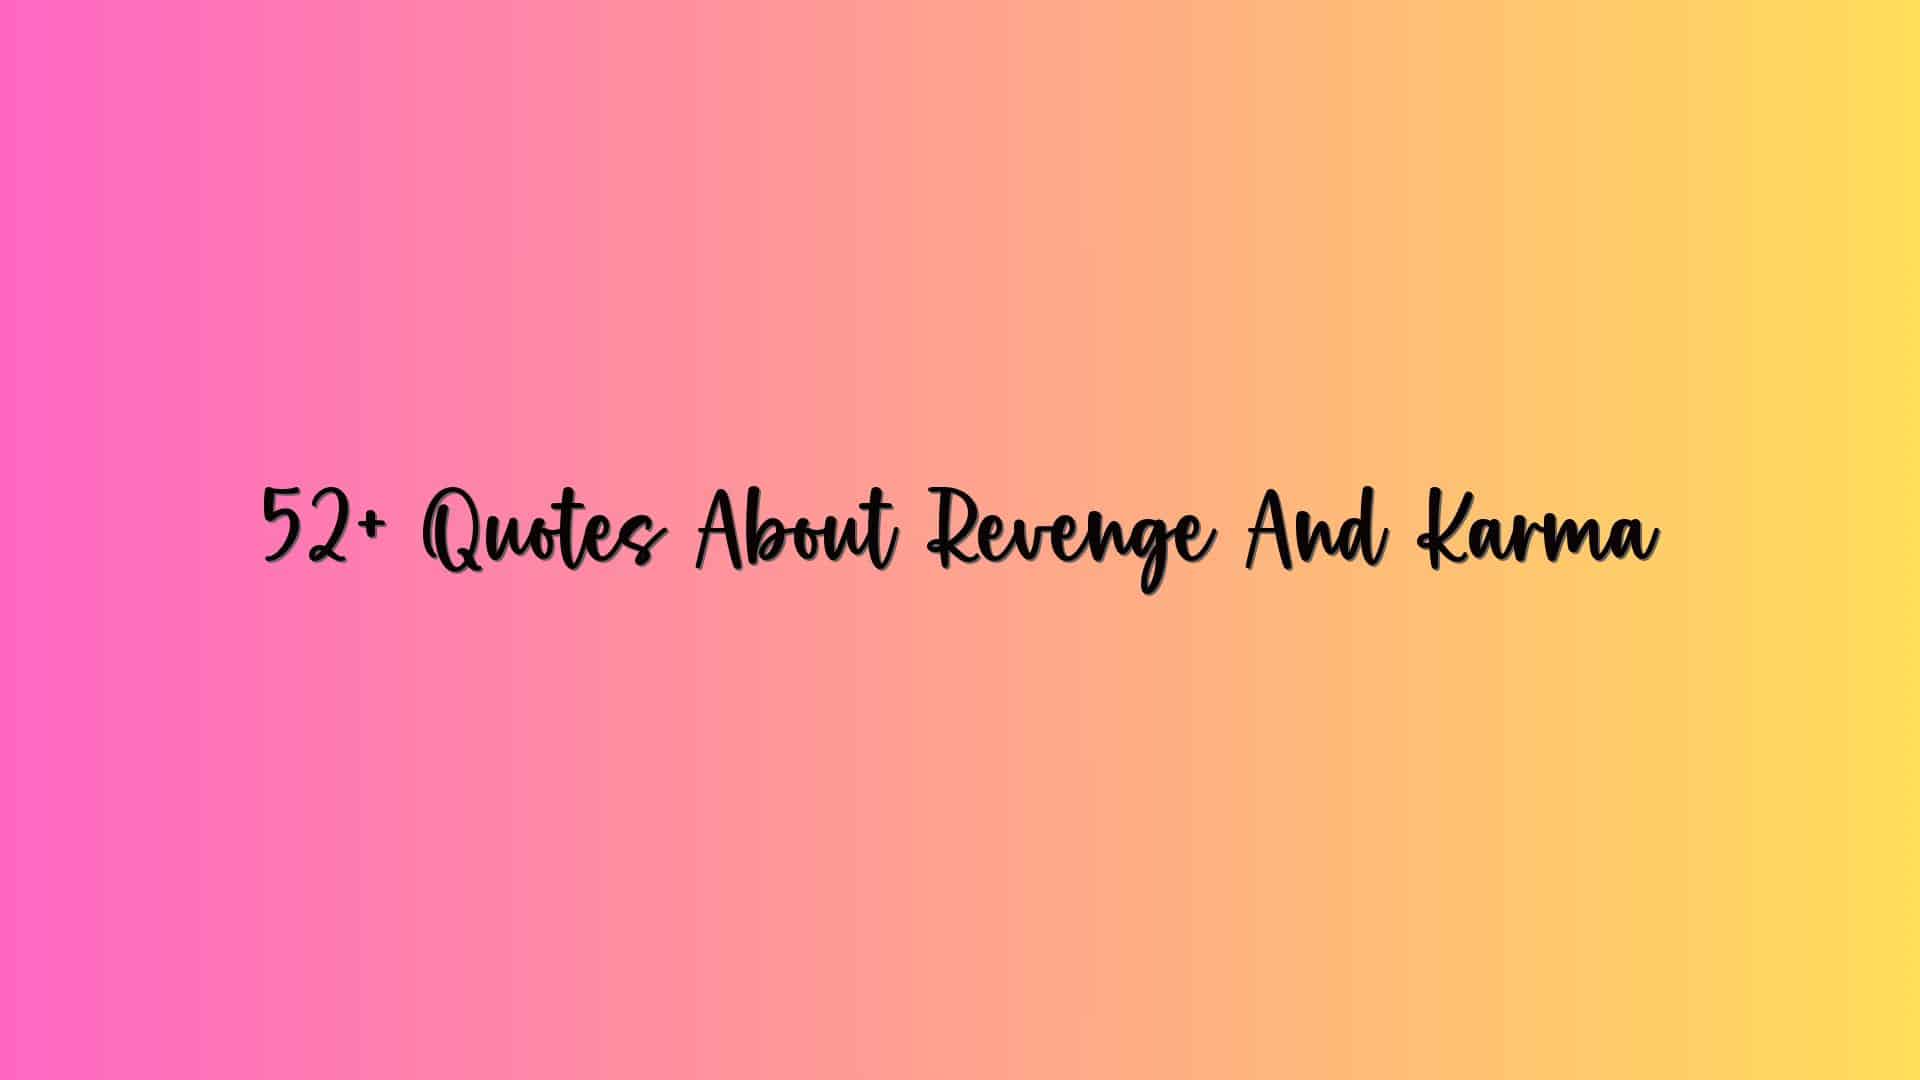 52+ Quotes About Revenge And Karma